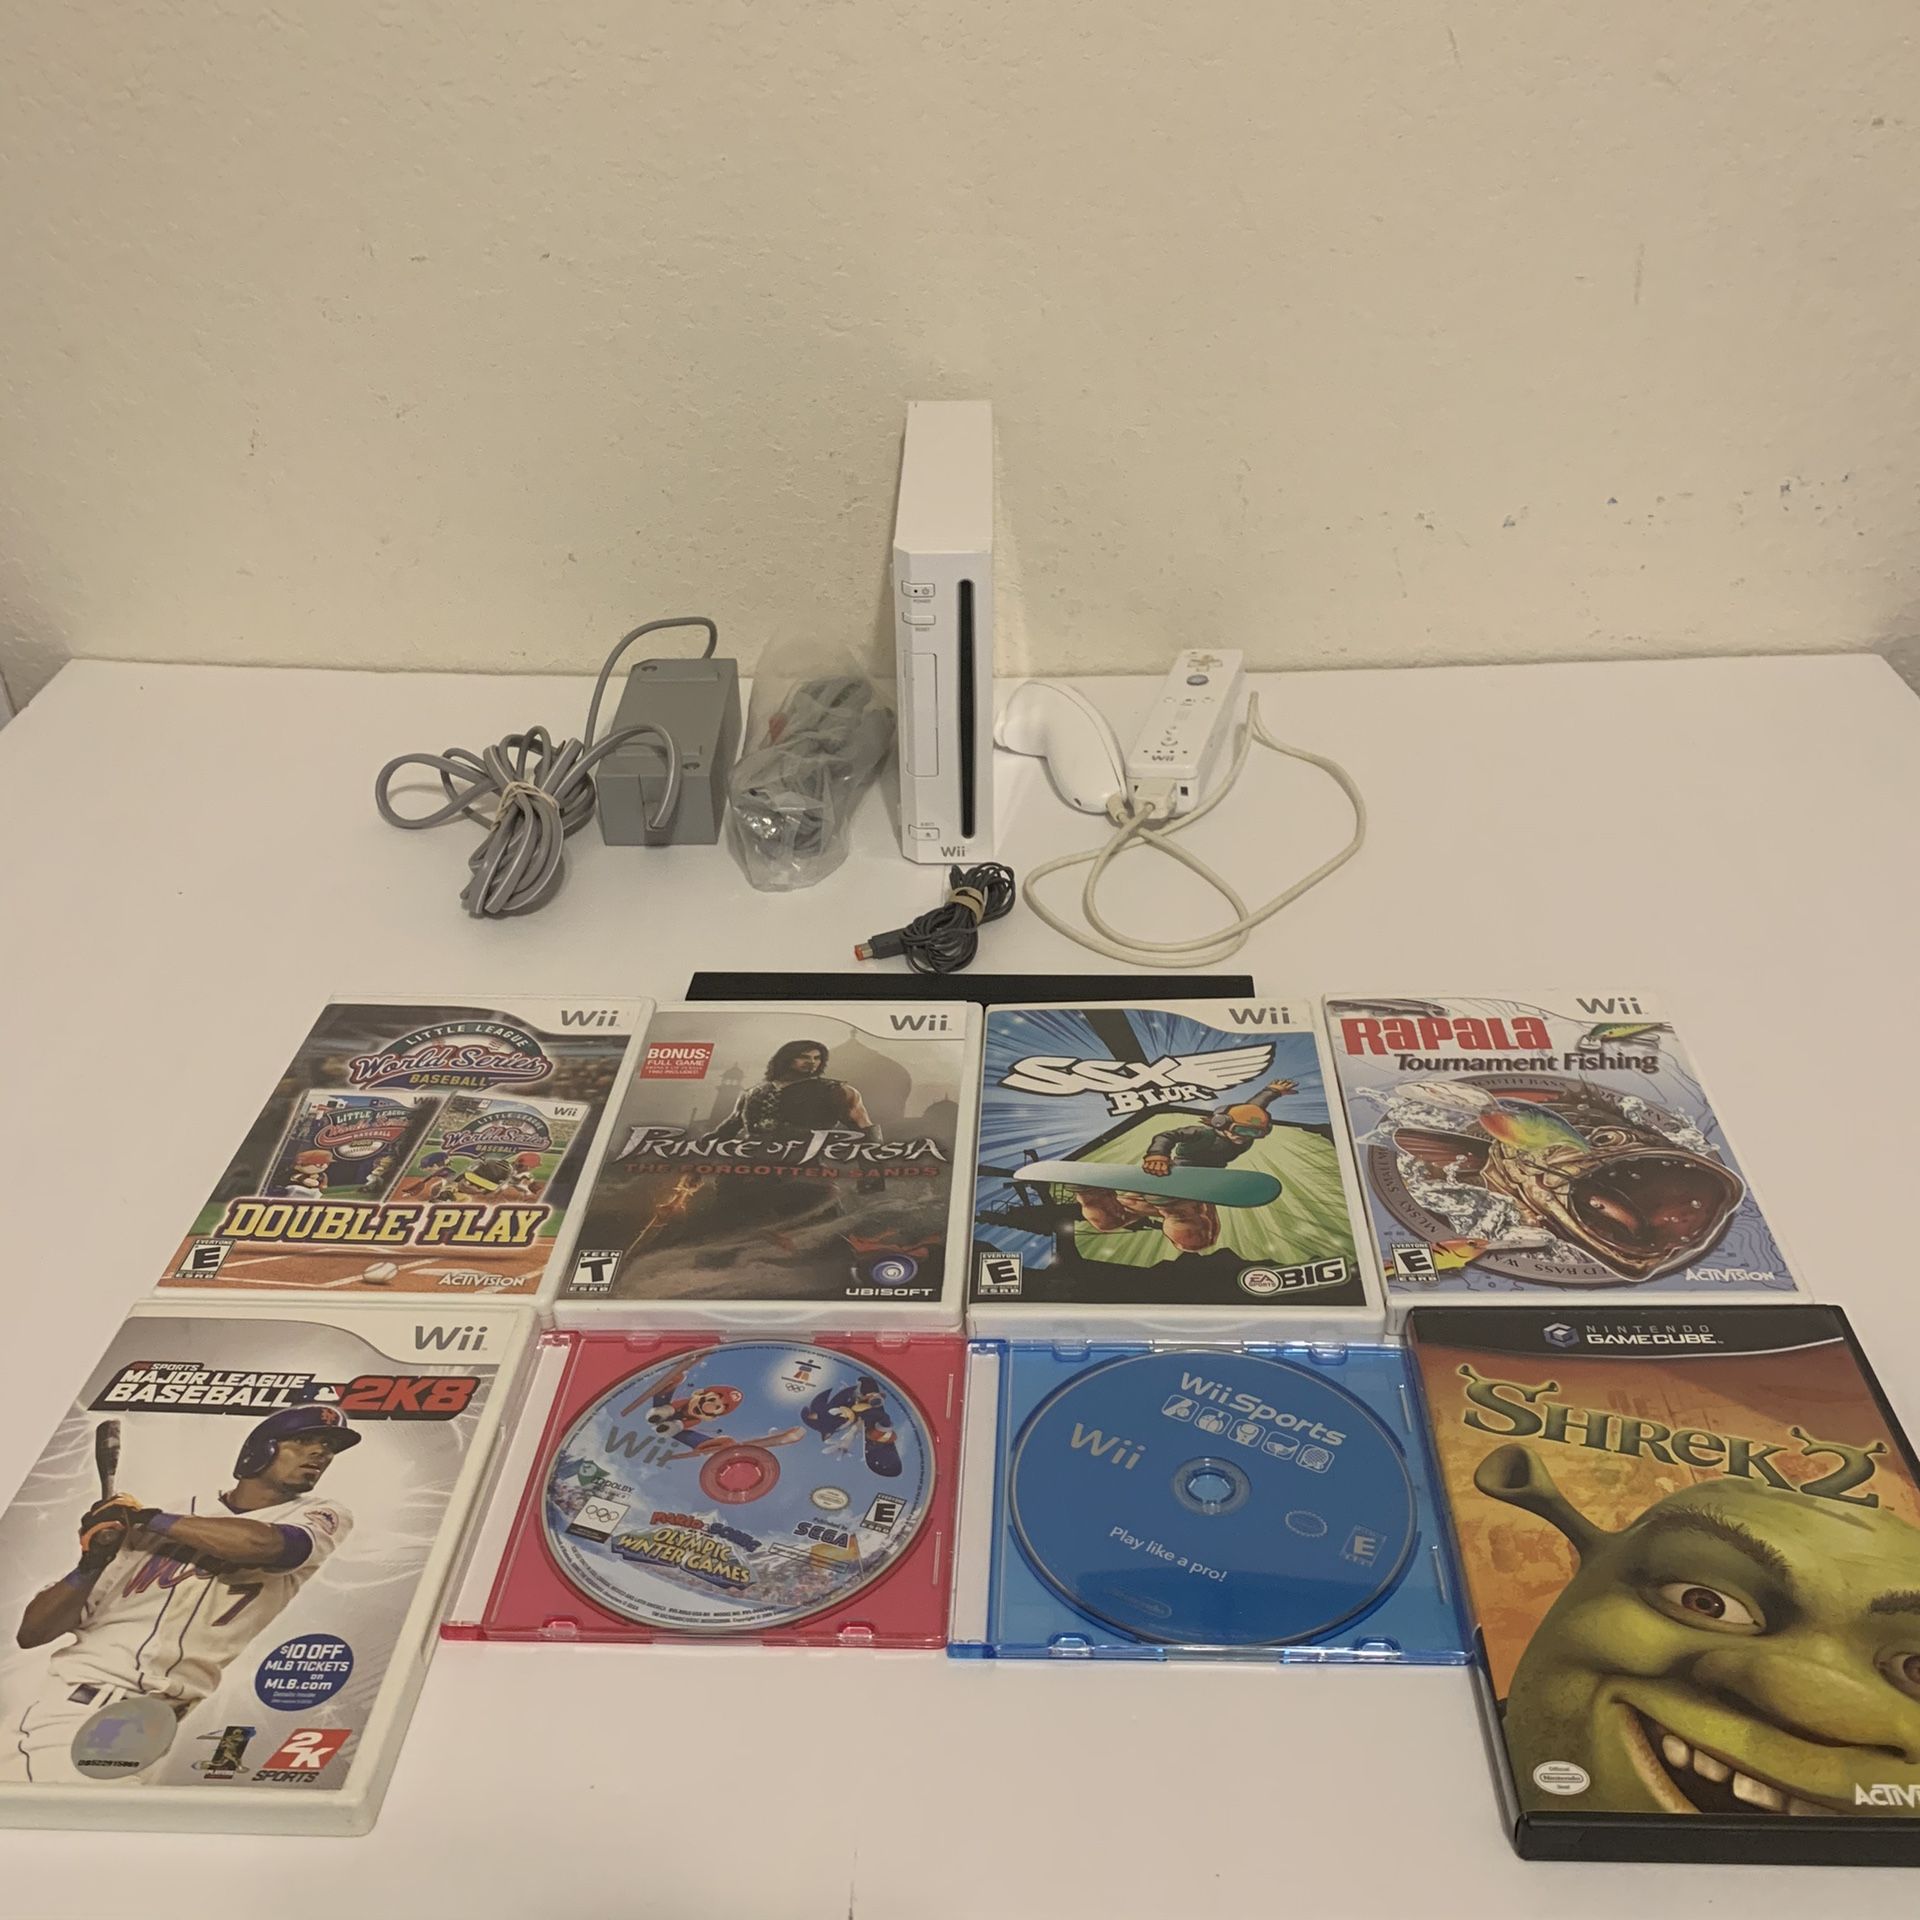 Nintendo Wii Console Bundle Lot RVL-001 with 8 GAMES - Wii Sports Super Mario